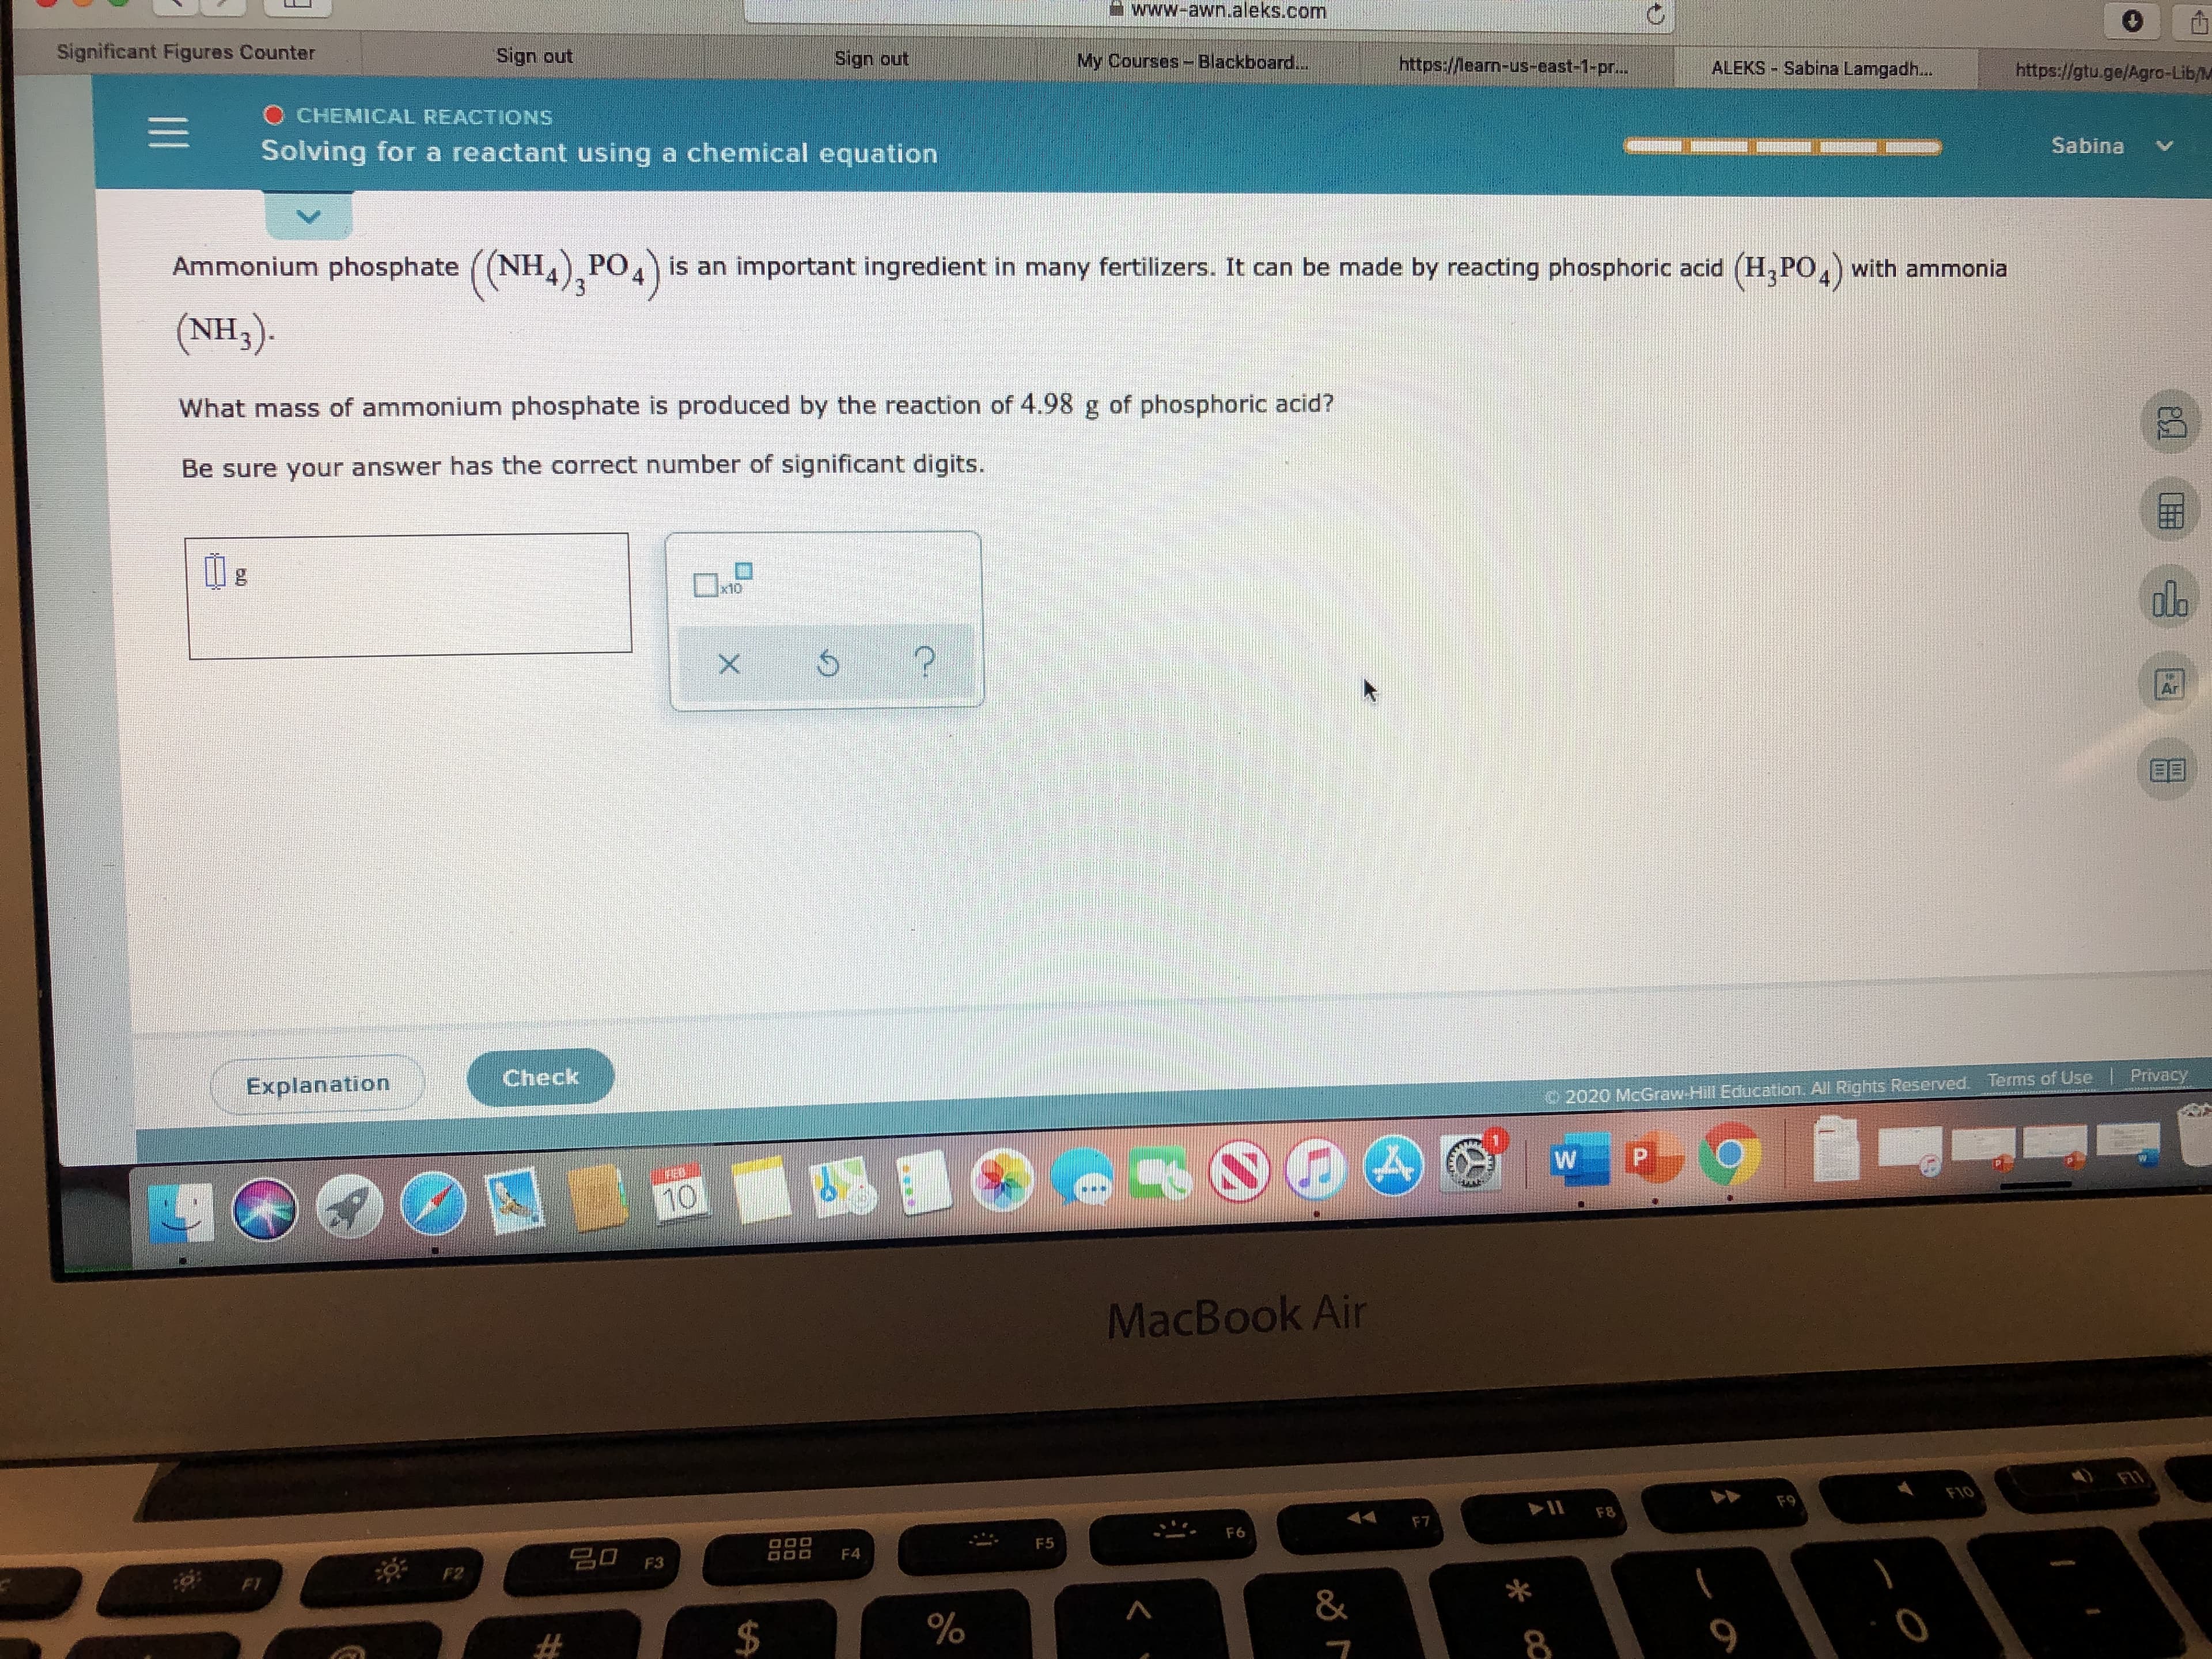 www-awn.aleks.com
Significant Figures Counter
Sign out
Sign out
My Courses-Blackboard...
https://learn-us-east-1-pr...
ALEKS Sabina Lamgadh...
https://gtu.ge/Agro-Lib/M
O CHEMICAL REACTIONS
Sabina
Solving for a reactant using a chemical equation
Ammonium phosphate ((NH) PO,) is an important ingredient in many fertilizers. It can be made by reacting phosphoric acid (H,PO,) with ammonia
(NH3).
What mass of ammonium phosphate is produced by the reaction of 4.98 g of phosphoric acid?
Be sure your answer has the correct number of significant digits.
do
x10
Ar
Check
Privacy
Terms of Use
Explanation
© 2020 McGraw Hill Education, All Rights Reserved.
P.
MacBook Air
F10
F9
F8
F7
F6
F5
20 F3
F4
F1
&
* cQ
%24
II
